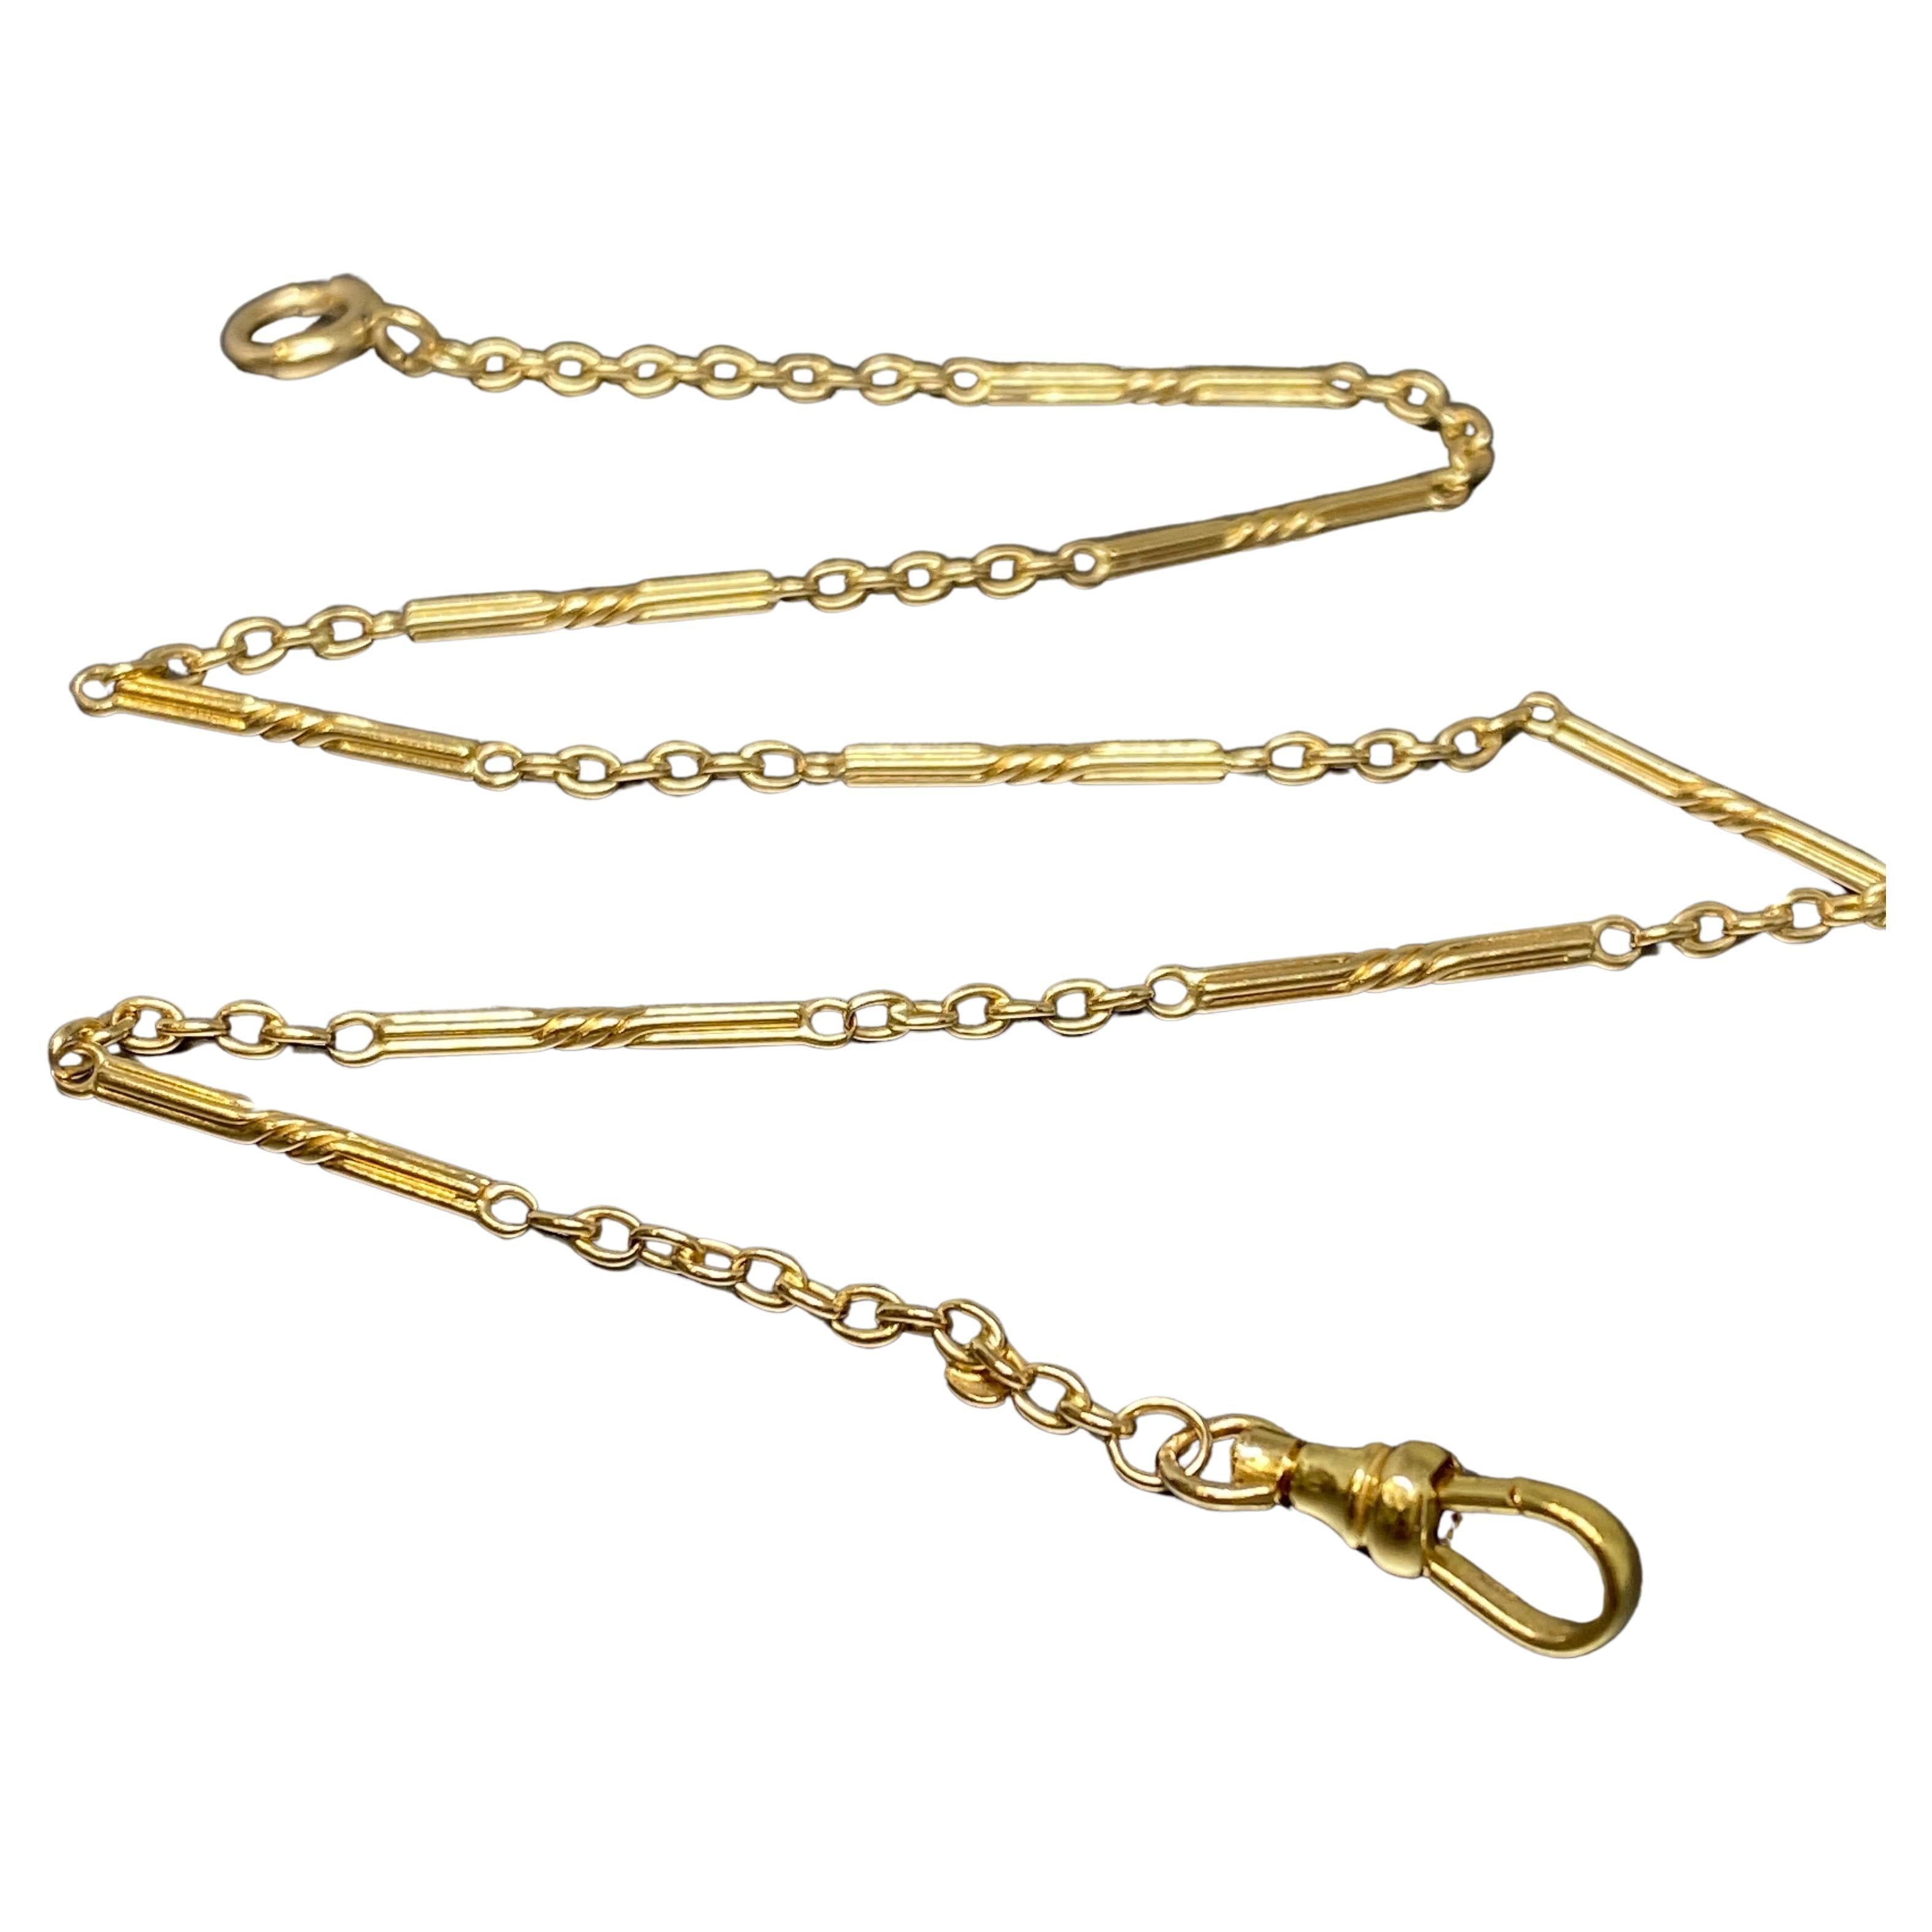 This early 20th century Art Deco fancy link watch chain has been crafted in 14k yellow gold.

The chain consists of alternating segments of gold fancy elongated links, alternating with six smaller rounded links in between.

The watch chain is fitted